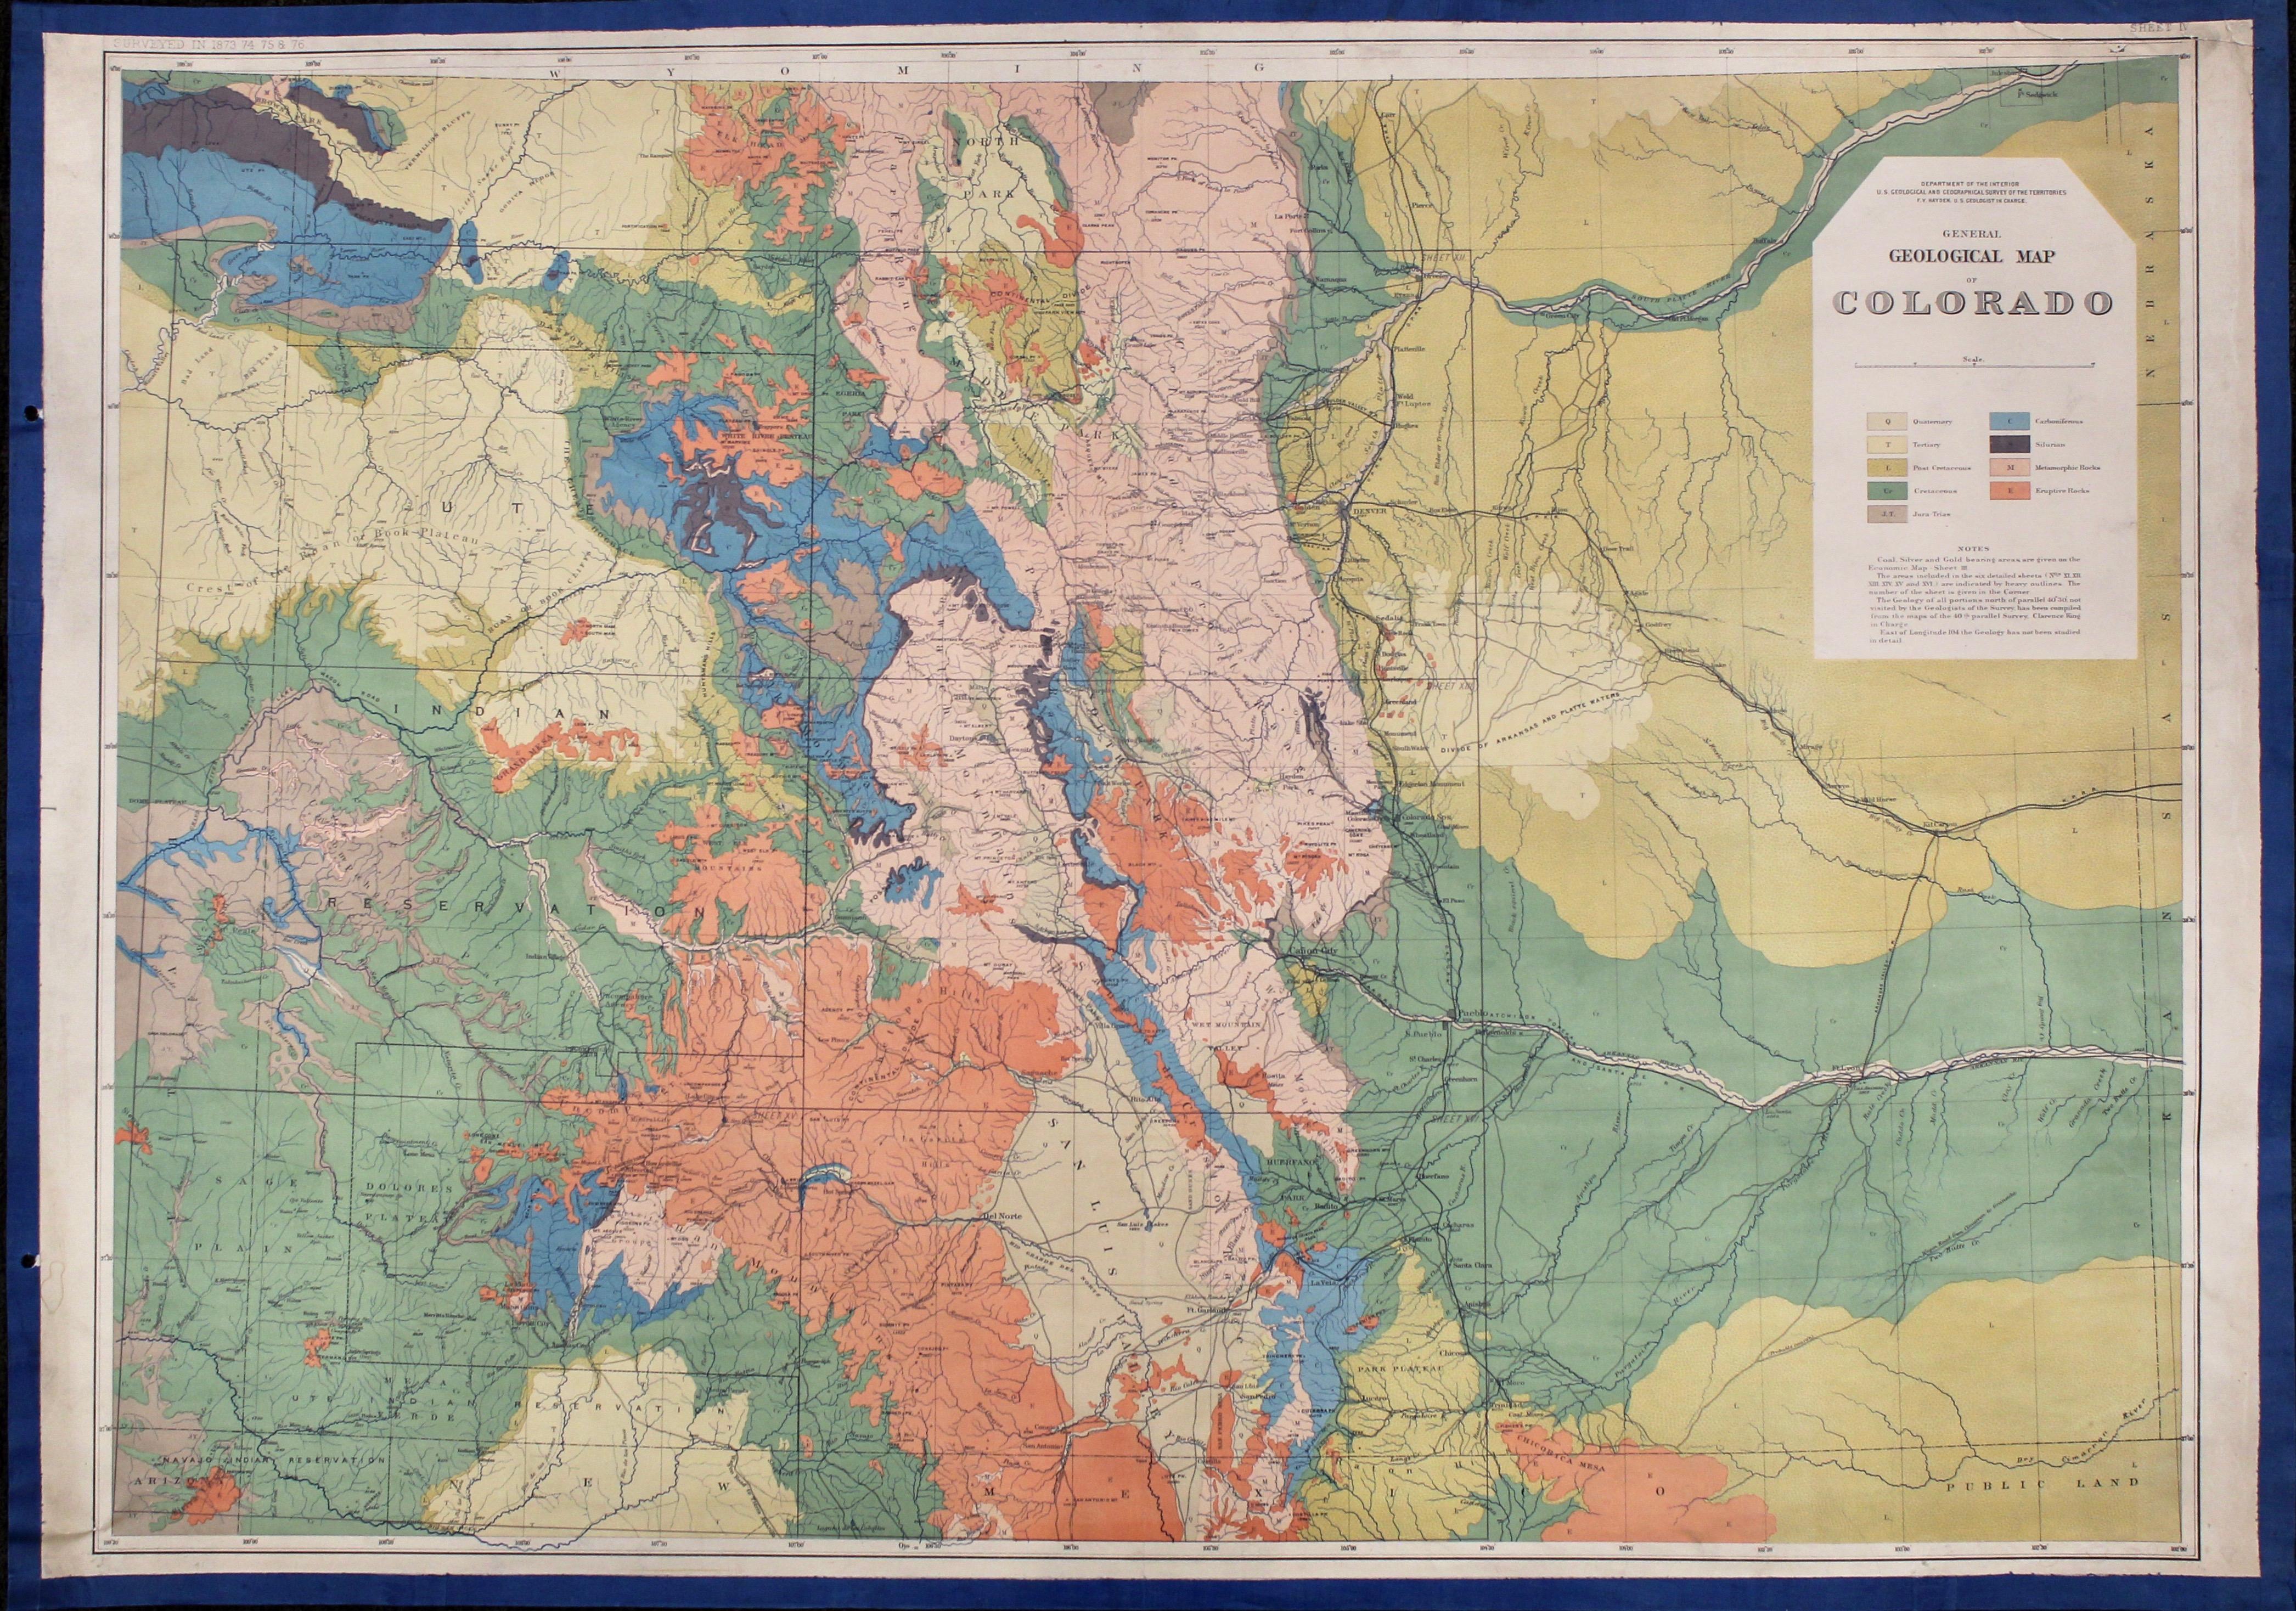 Offered is an original “General Geological Map of Colorado” by F. V. Hayden. The map was printed as part of the 1877 “Geological and Geographical Atlas of Colorado and Portions of Adjacent Territory,” lithographed by Julies Bein, and sponsored by